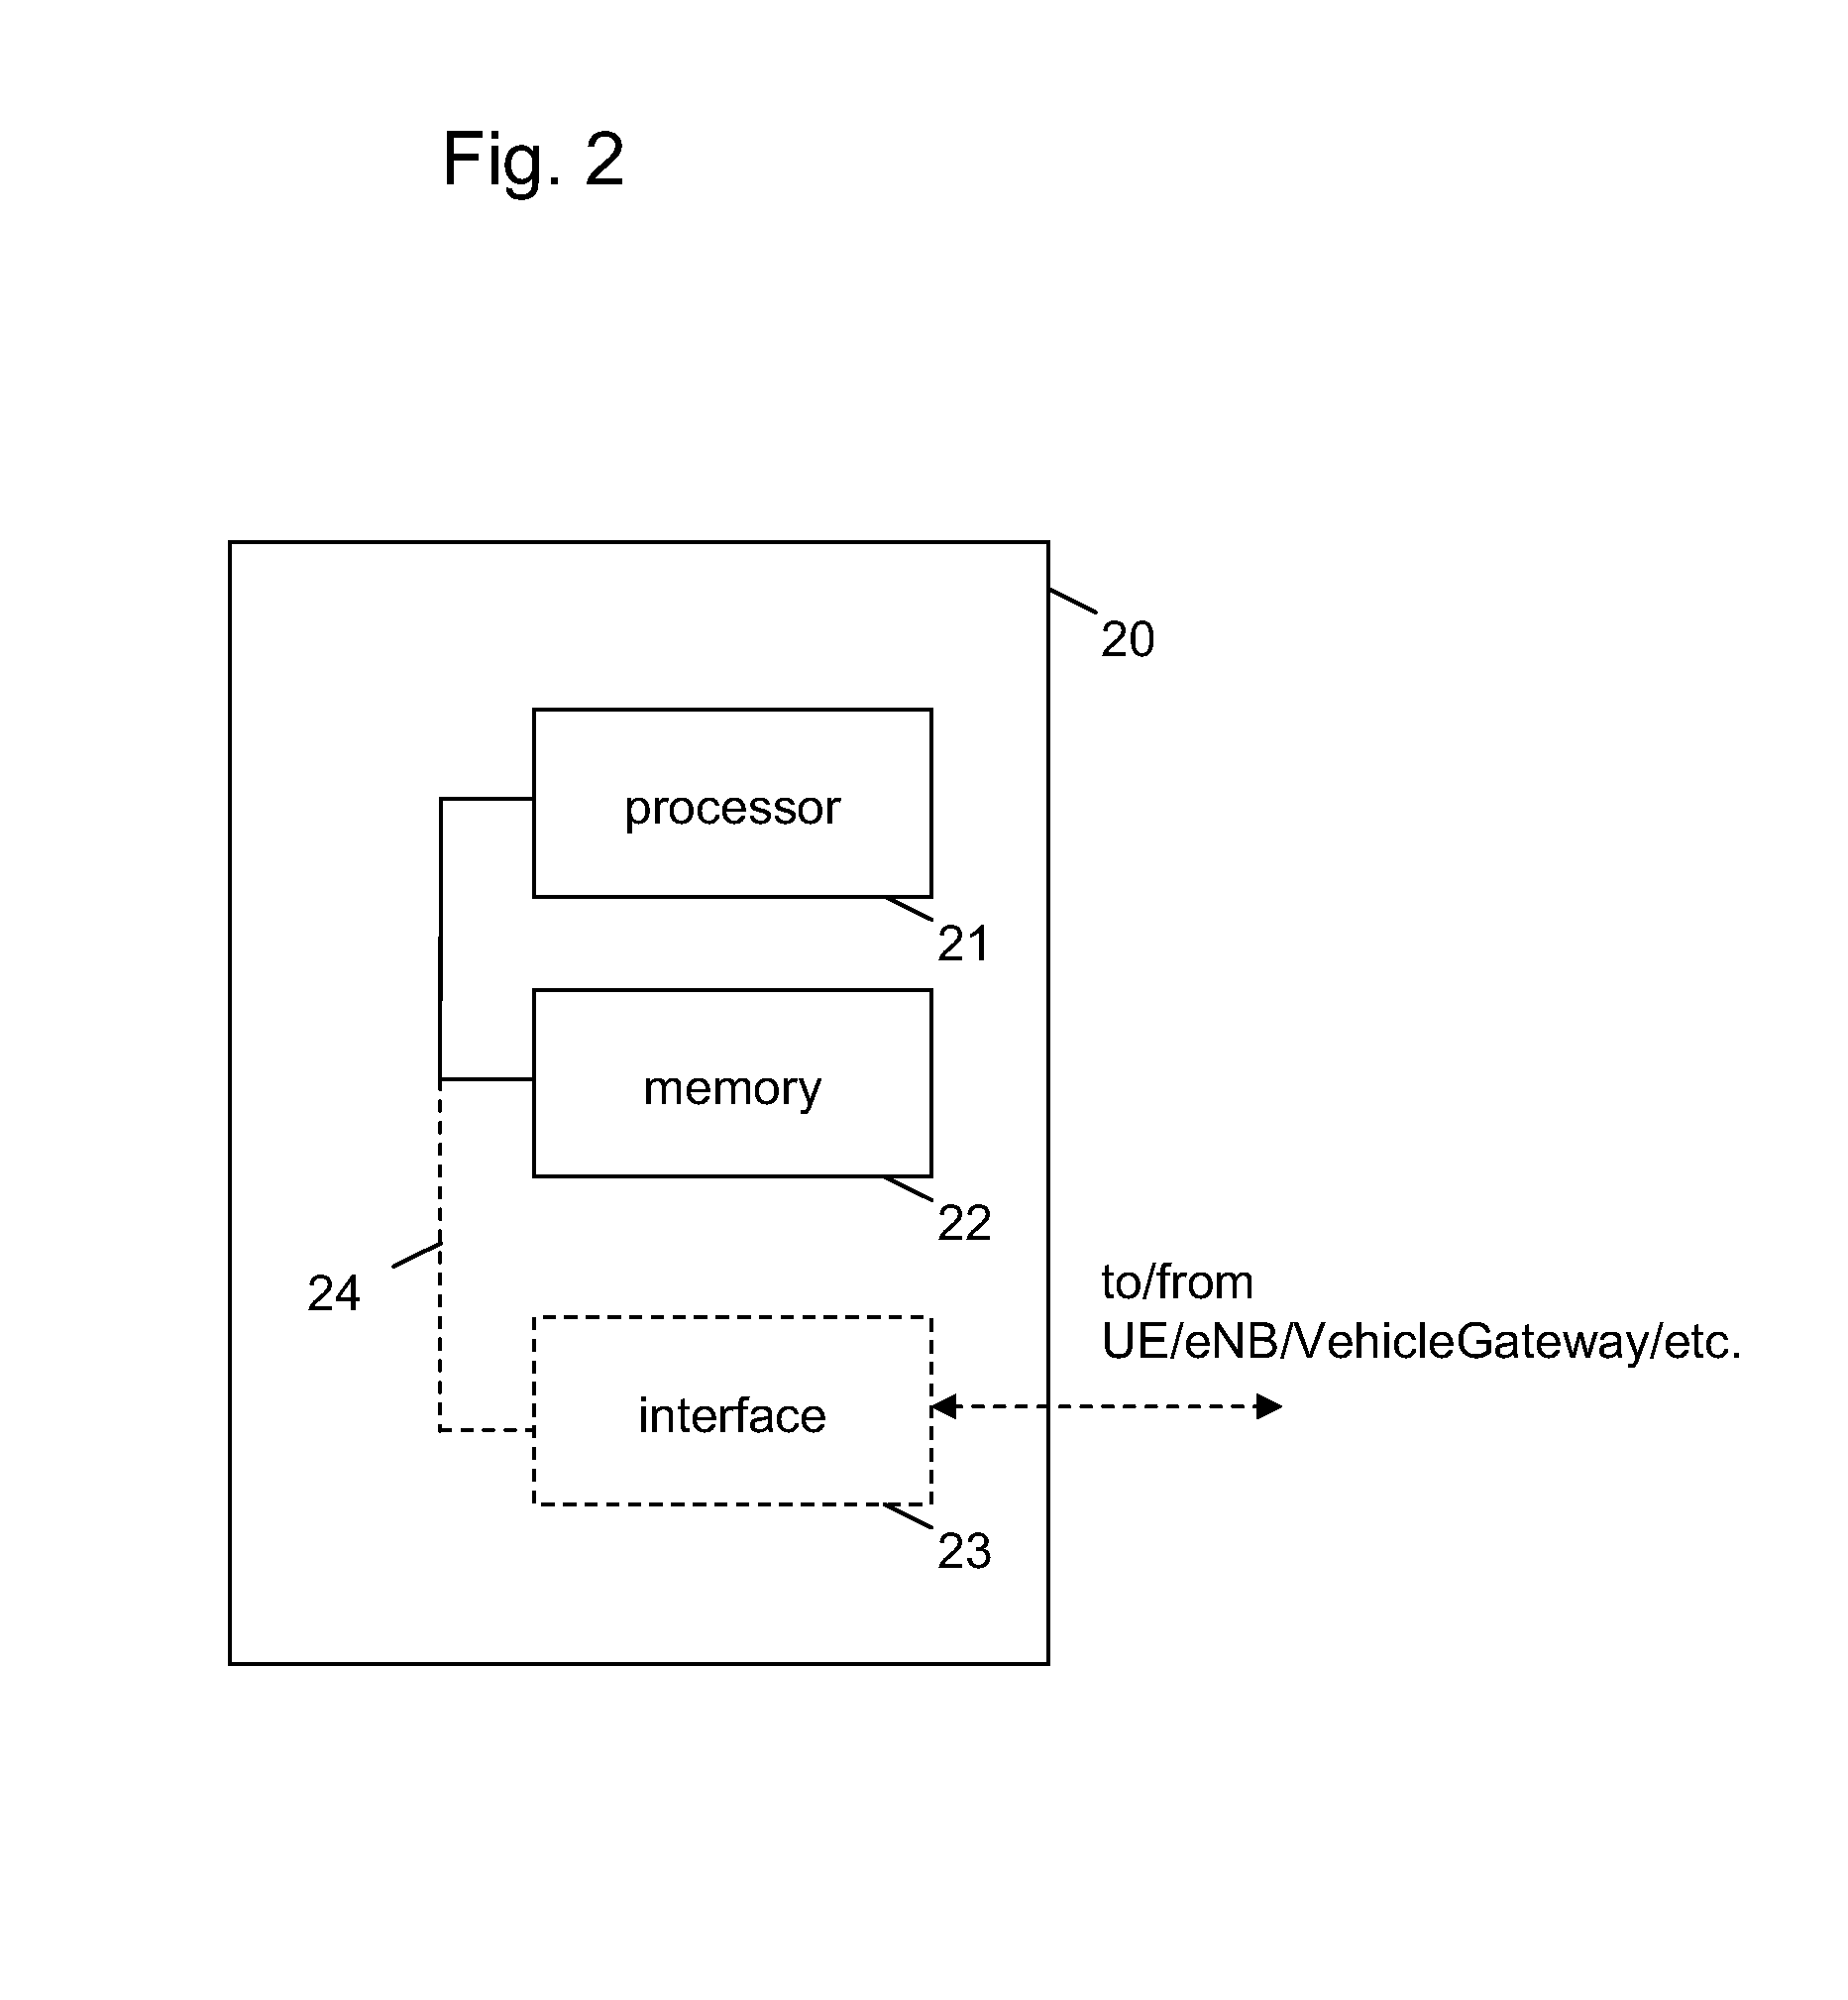 Repetition transmission for downlink control signal